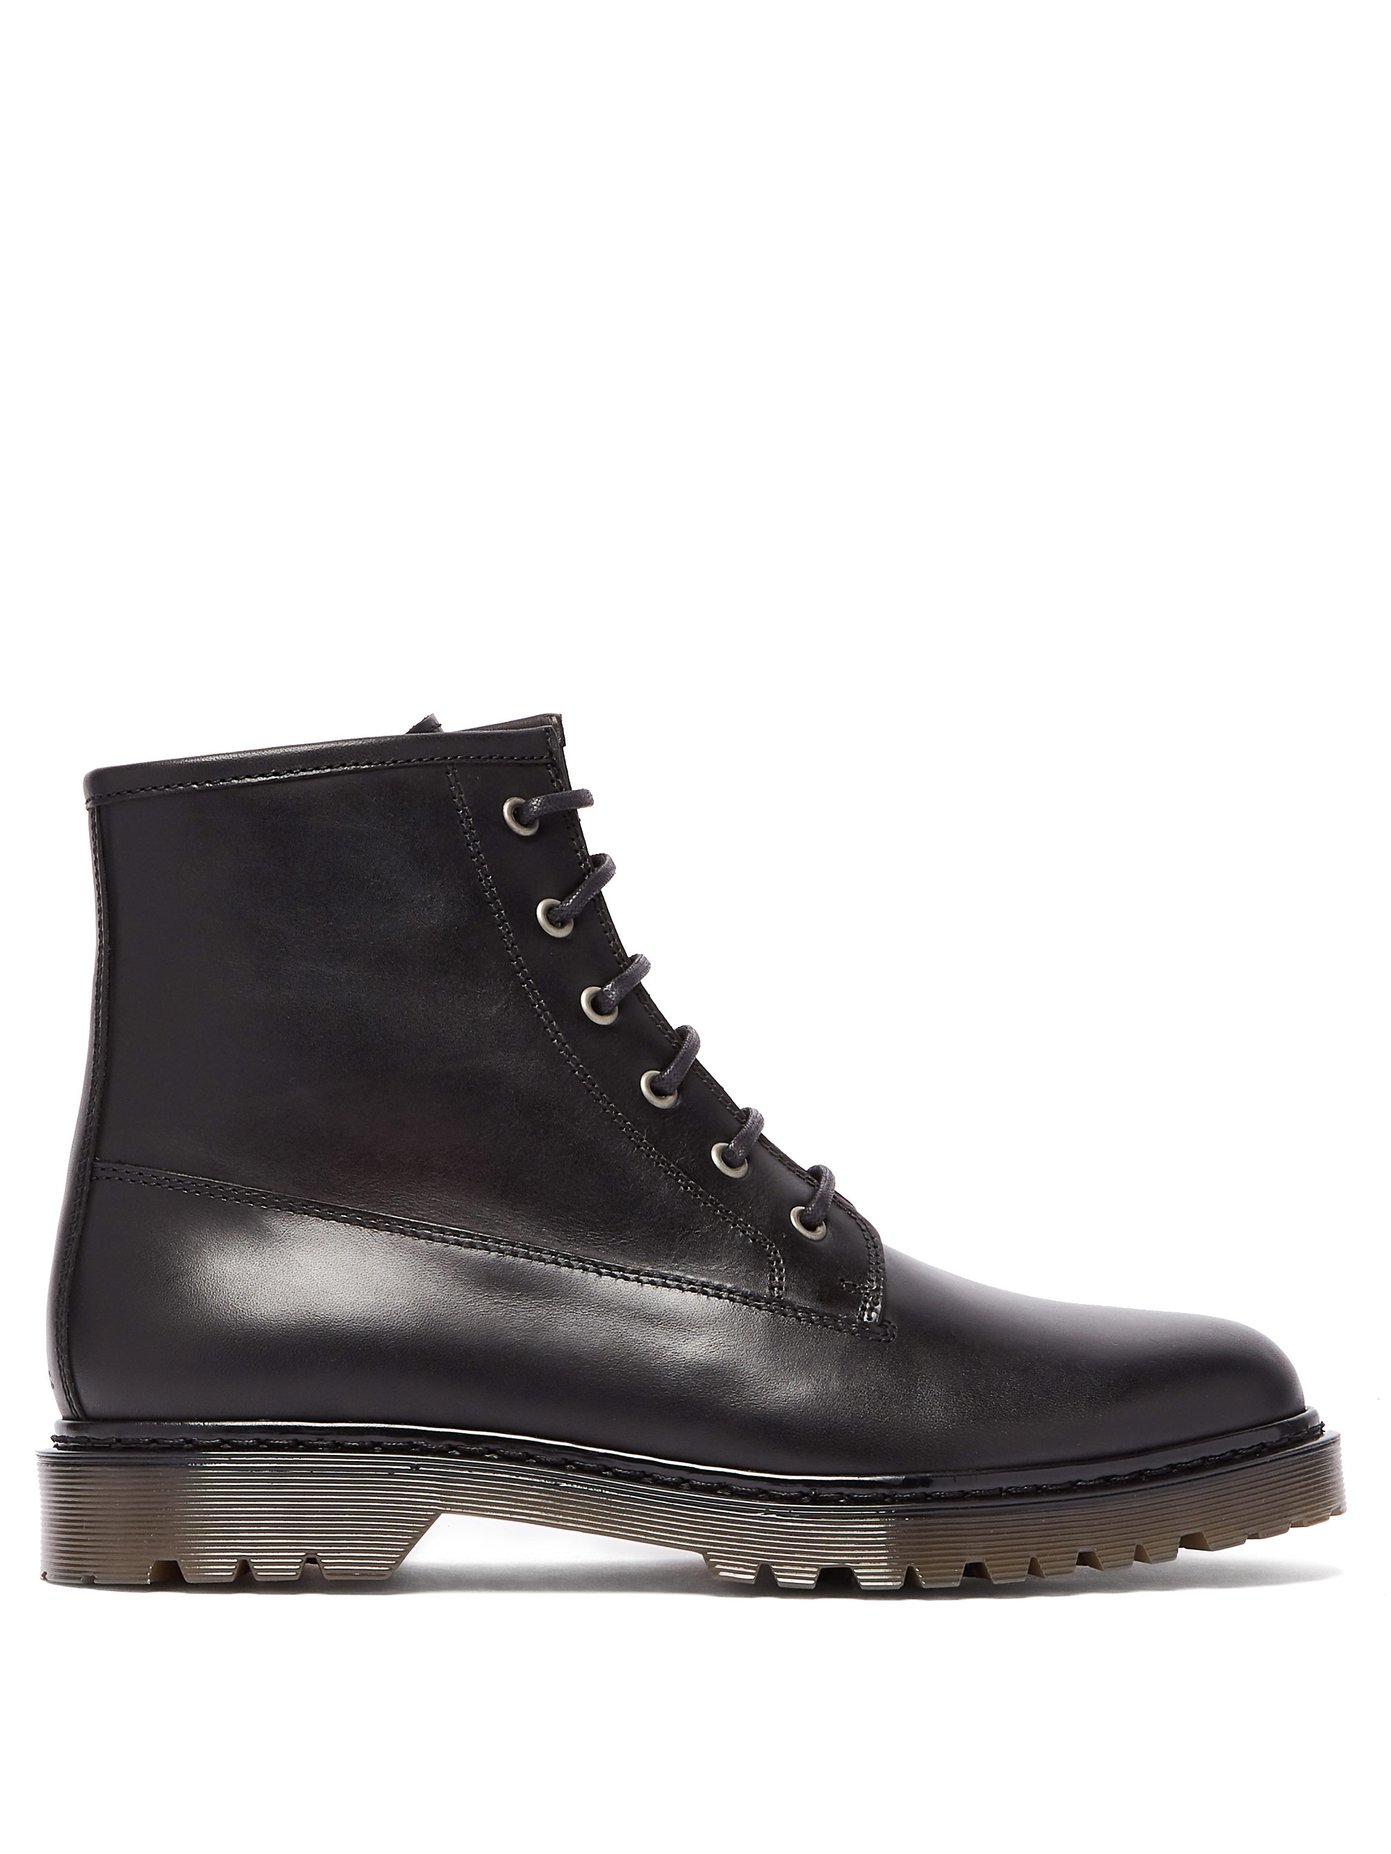 Ezra lace-up leather boots | A.P.C 